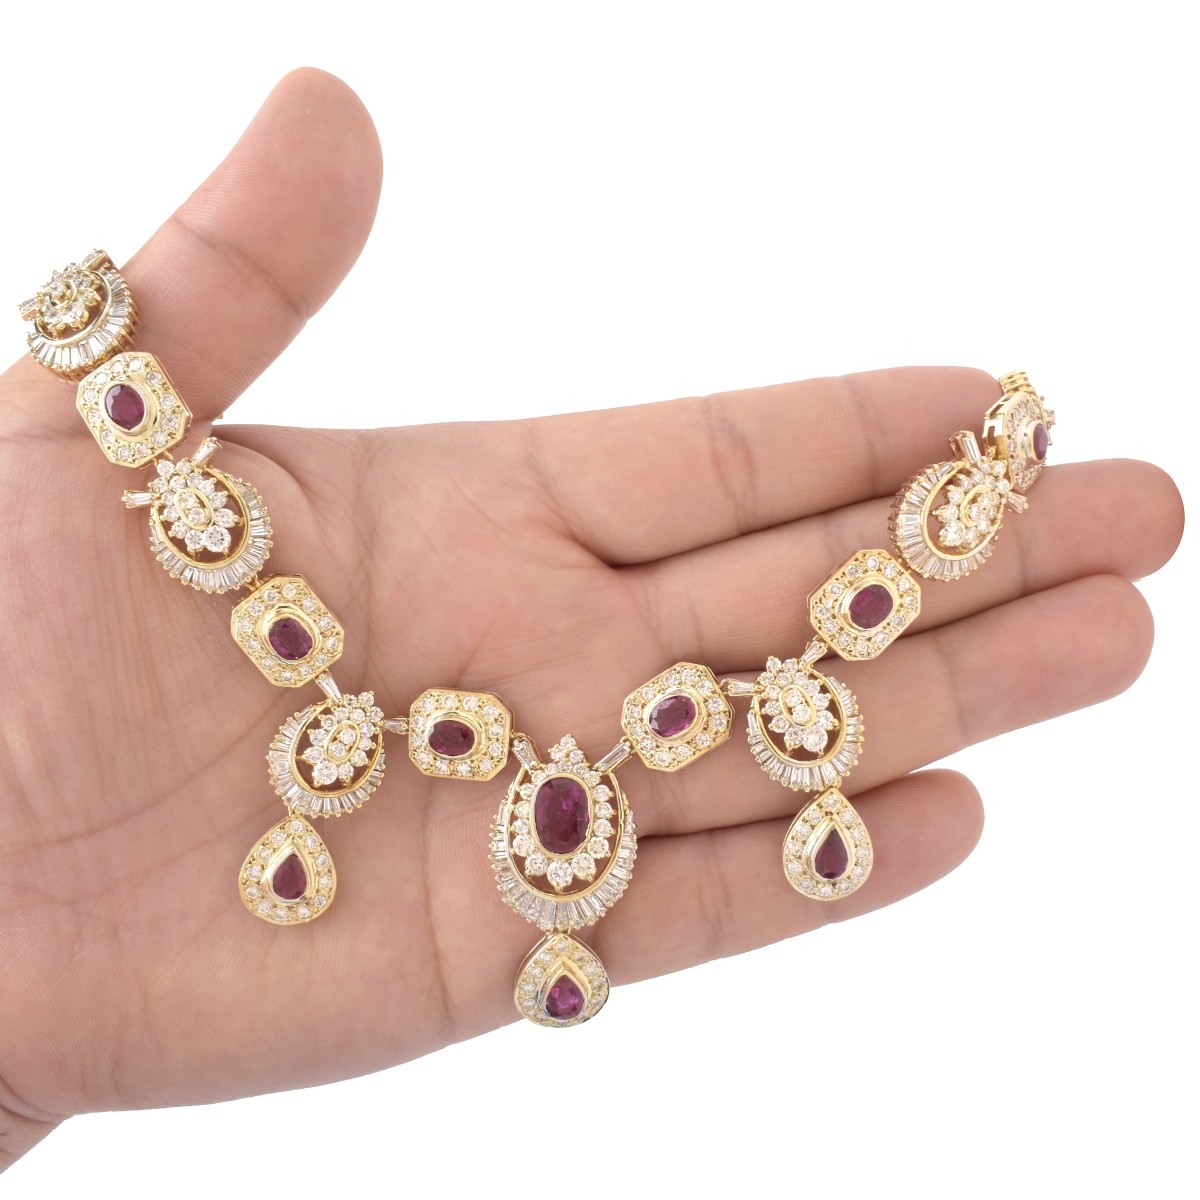 GAL Ruby, Diamond and 14K Necklace